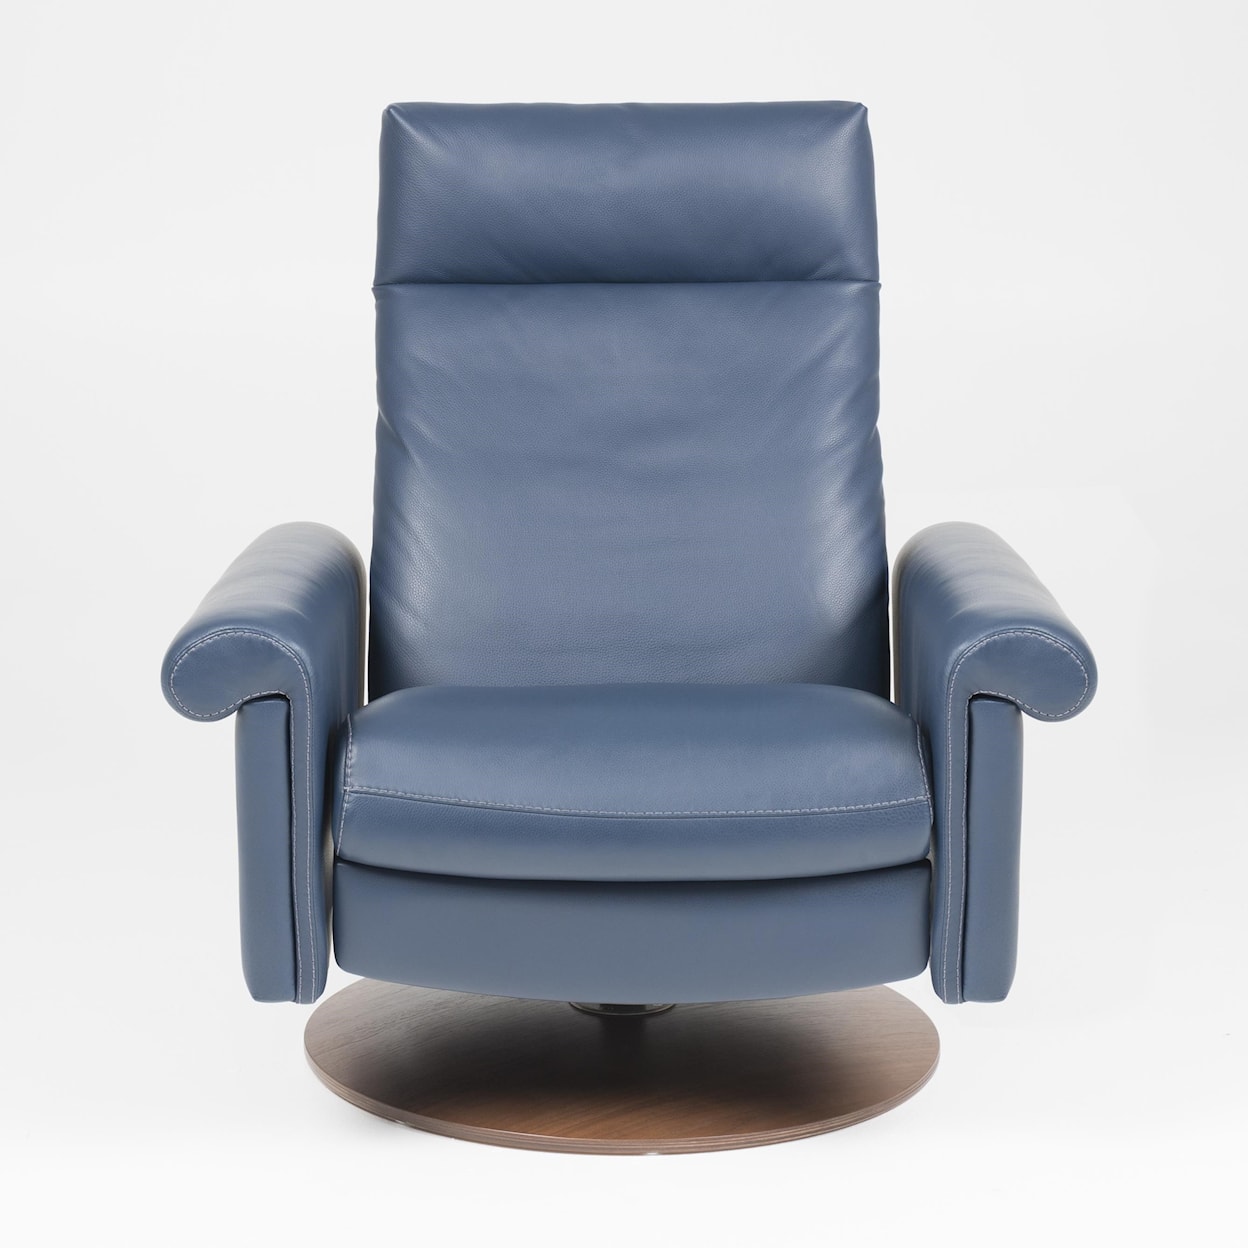 American Leather Nimbus Swivel Glider Reclining Chair -Large Size